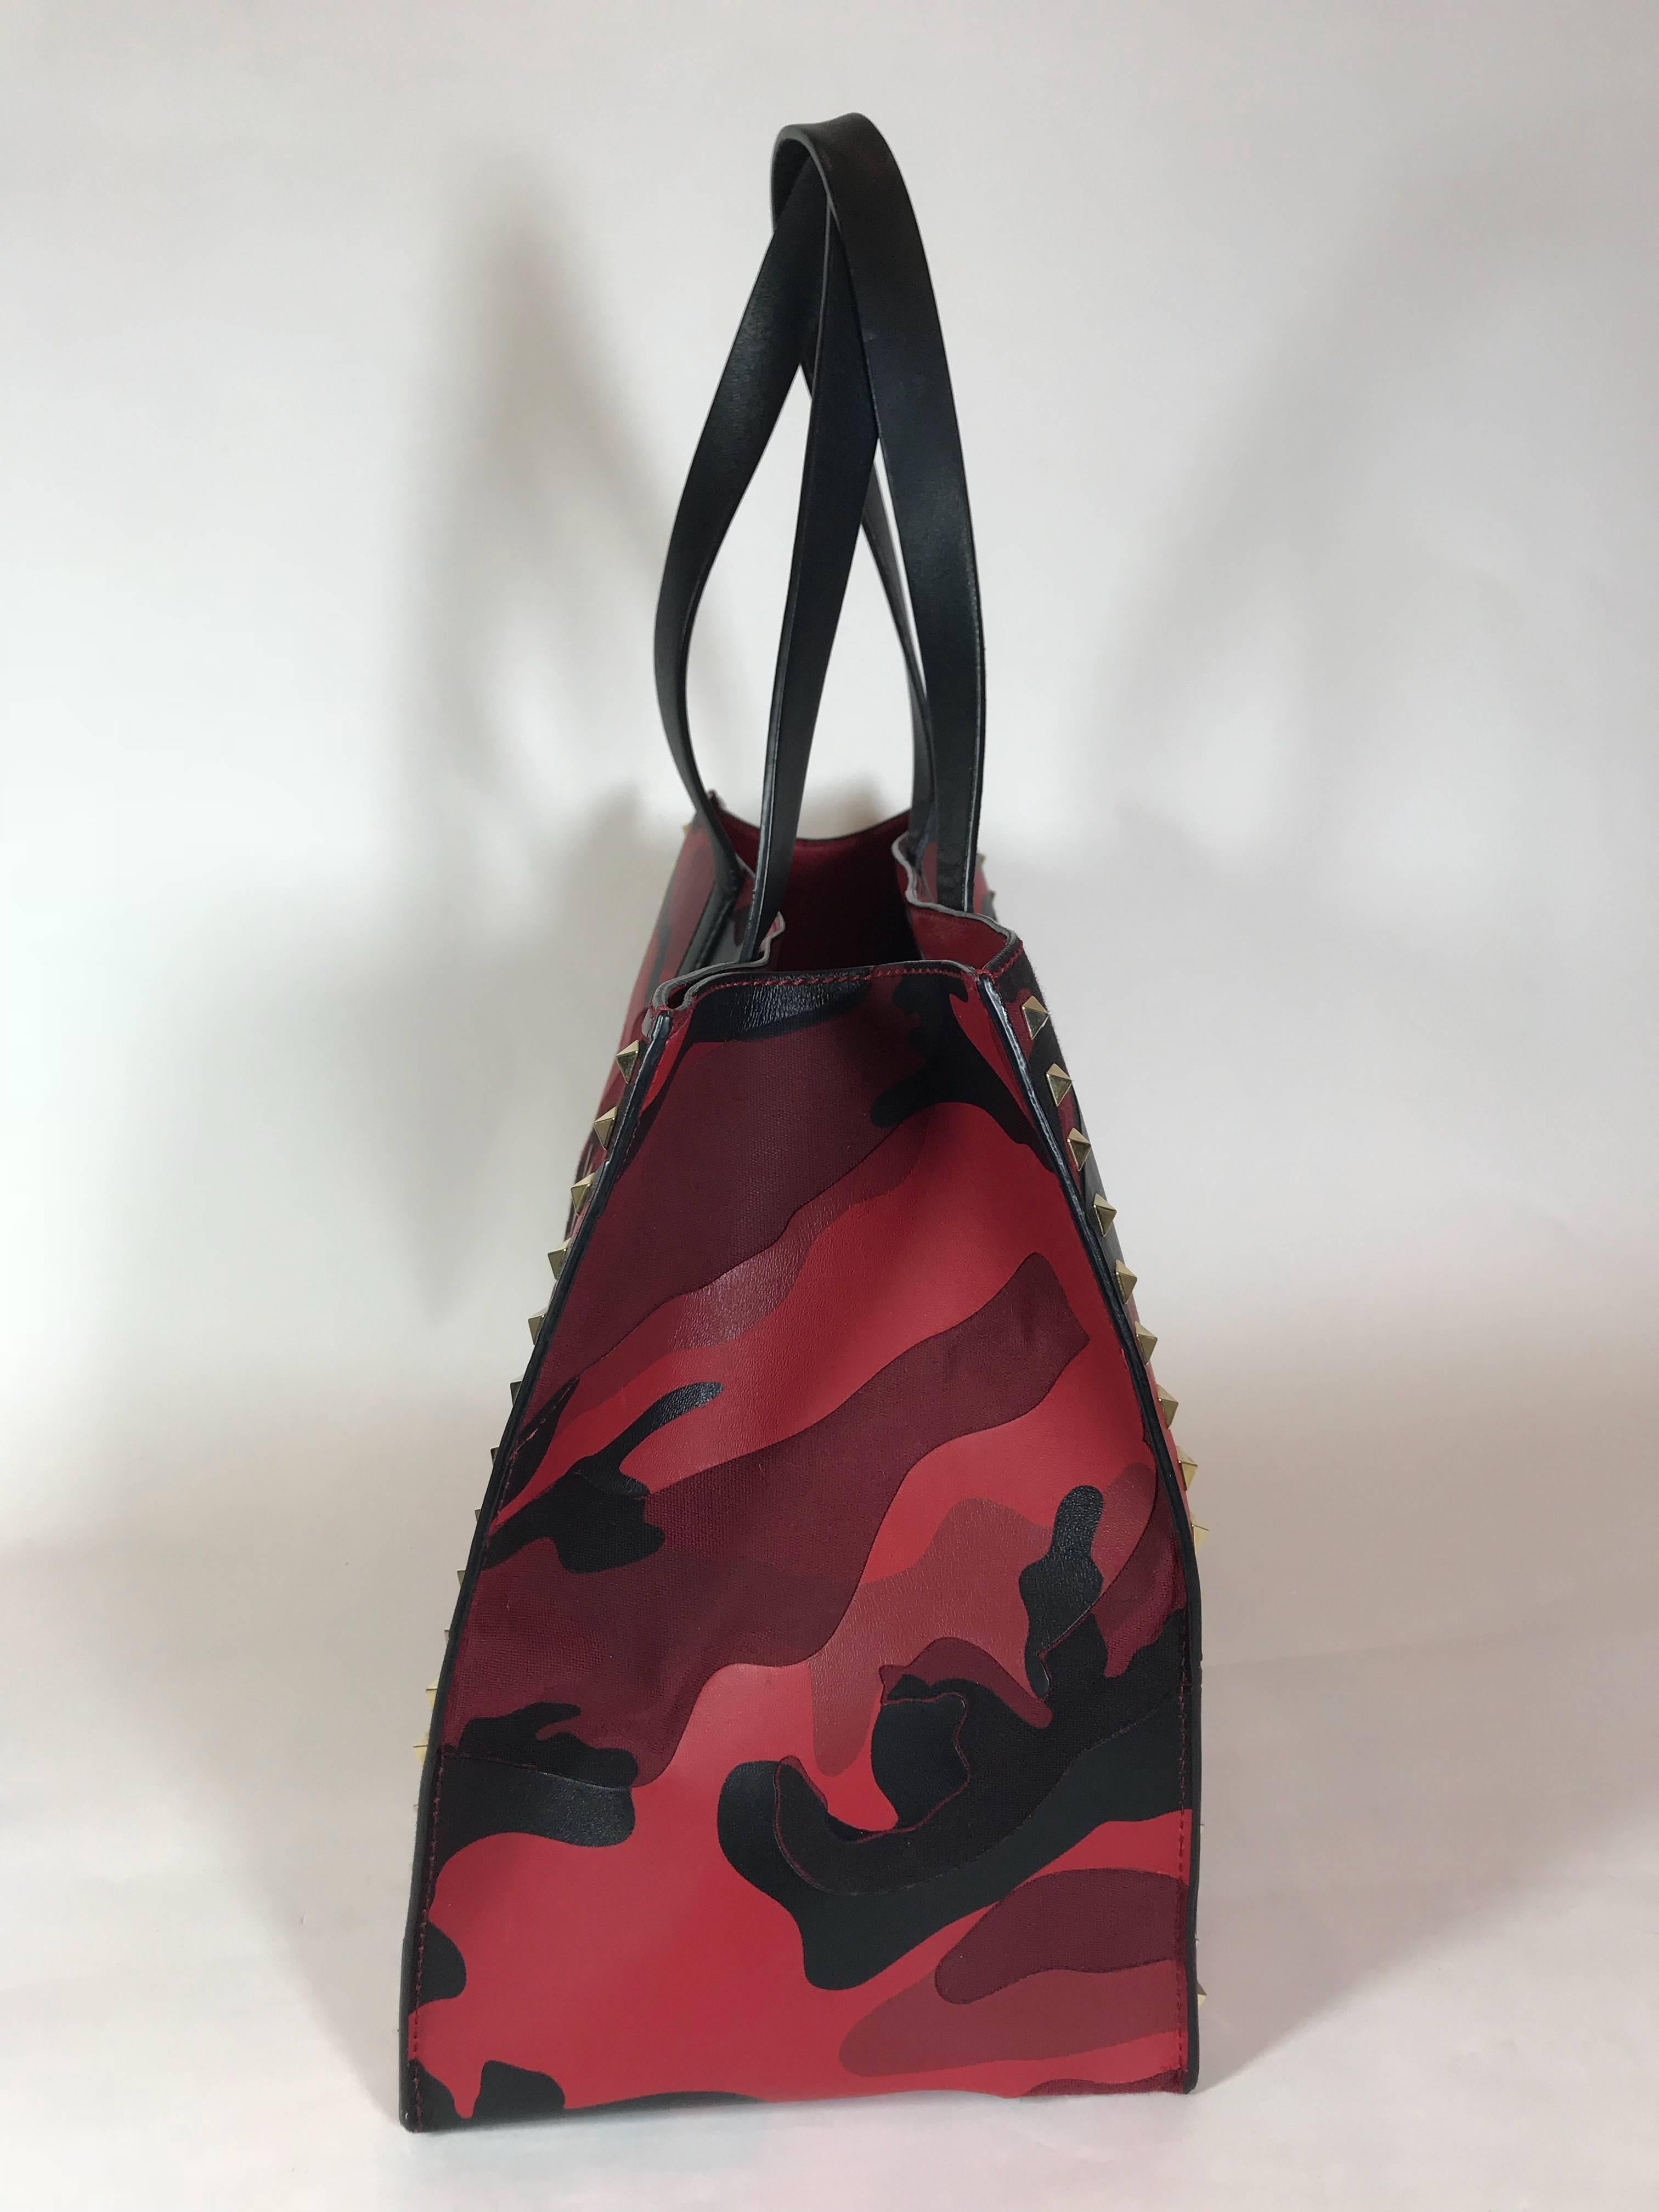 Red and black camouflage print canvas and leather. Gold-tone hardware. Magnetic snap closure at top. Dual flat shoulder straps. Black and tonal camouflage print leather trim. Rockstud stud embellishments throughout. Foil-stamped leather logo placard